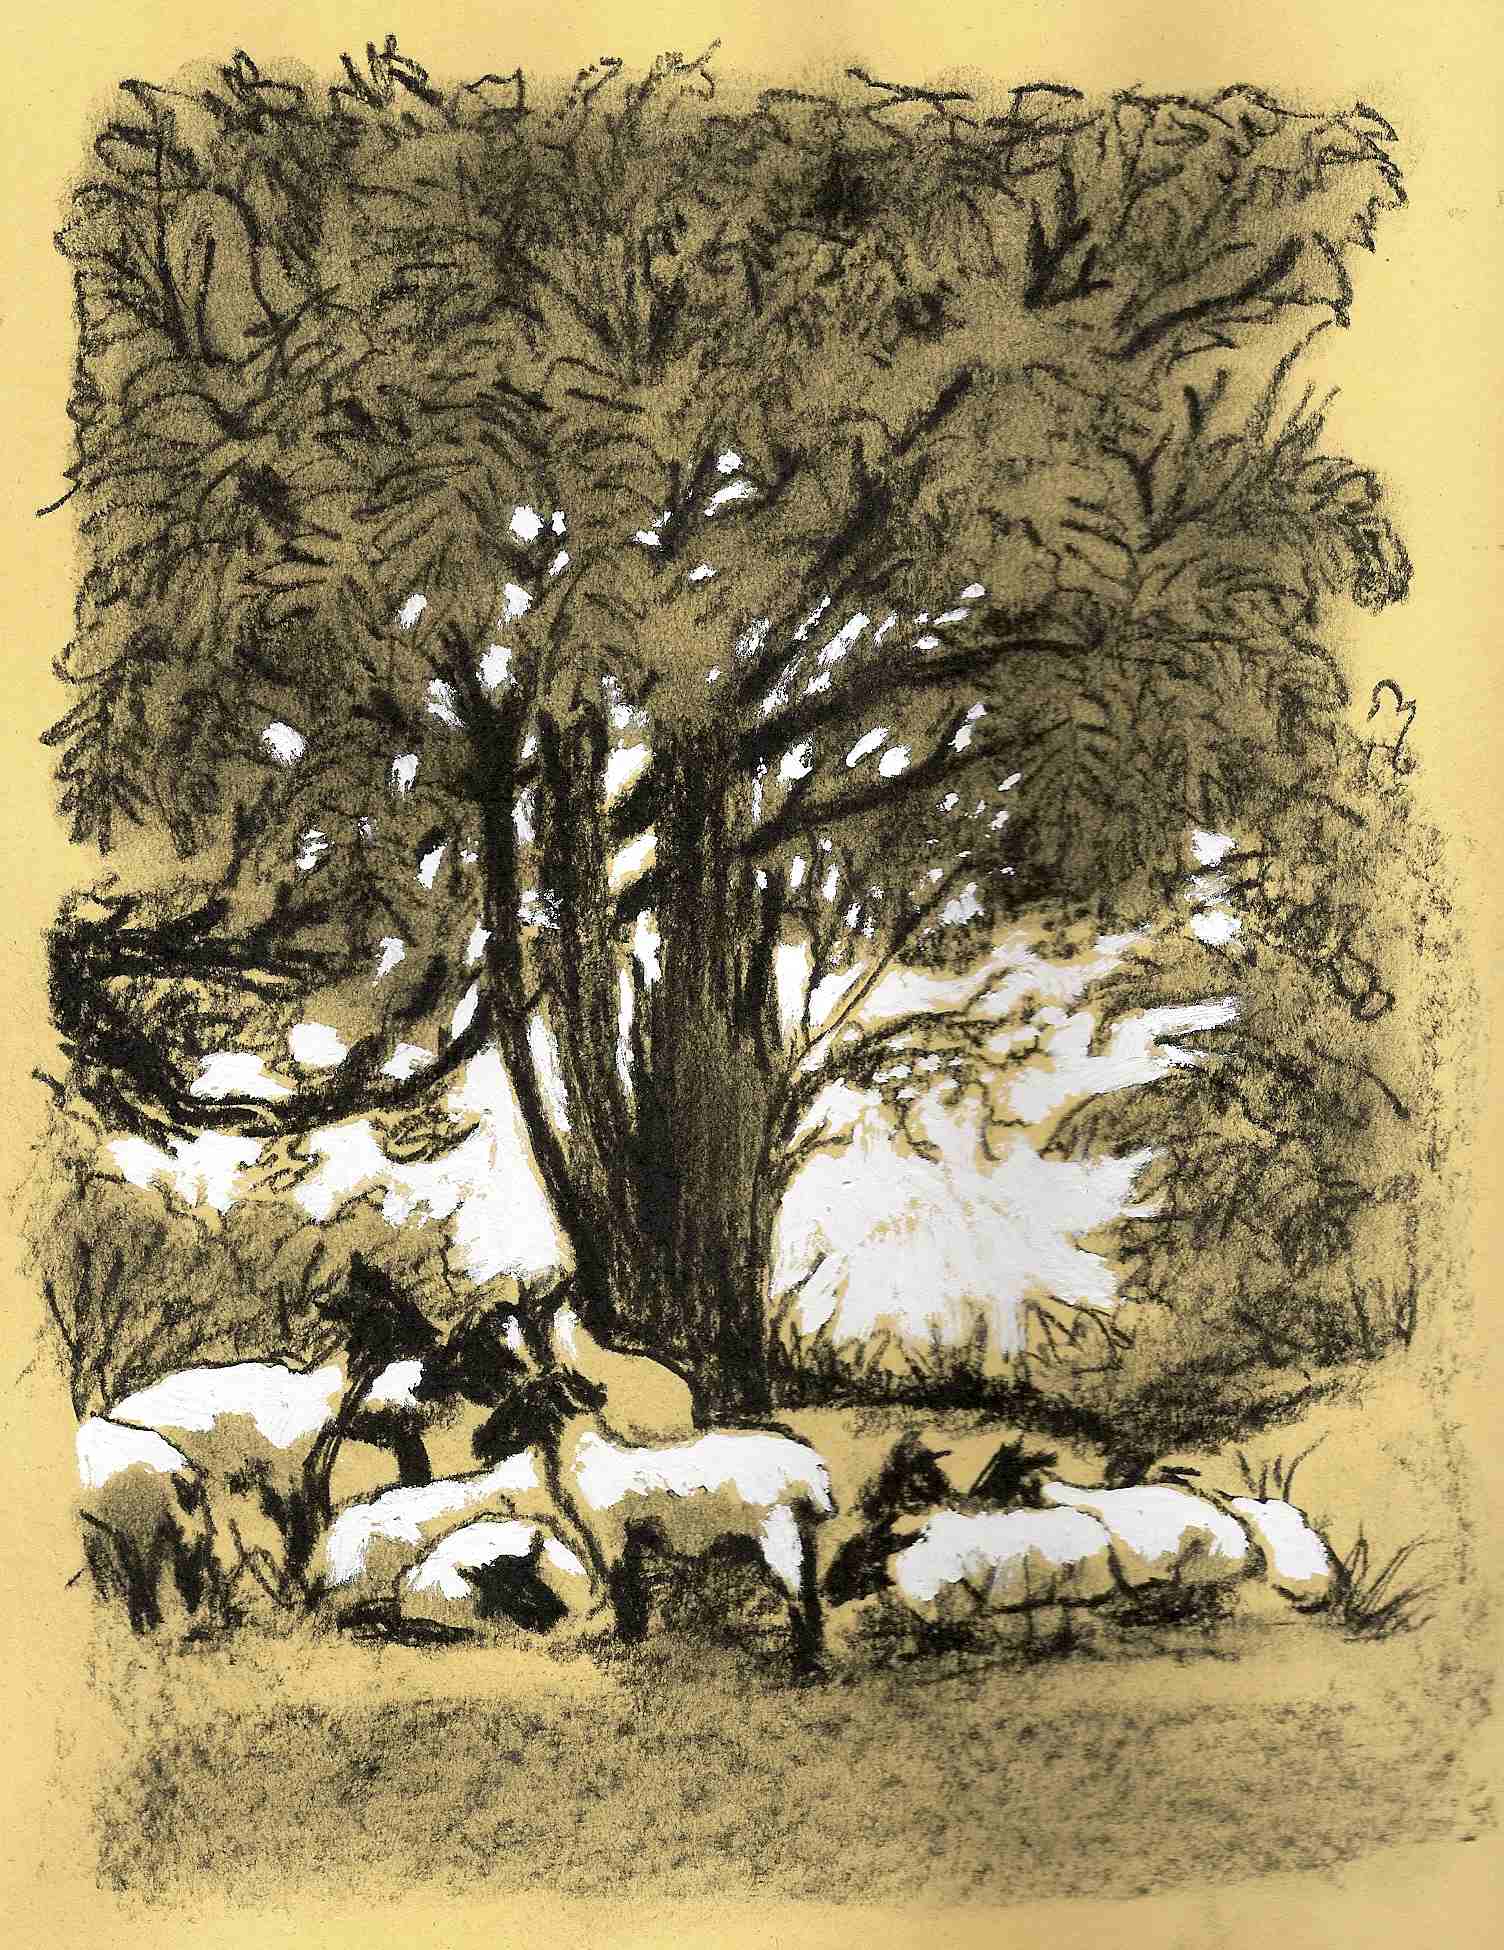 NATURE - SHEEP UNDER A TREE - CHARCOAL ON YELLOW PAPER